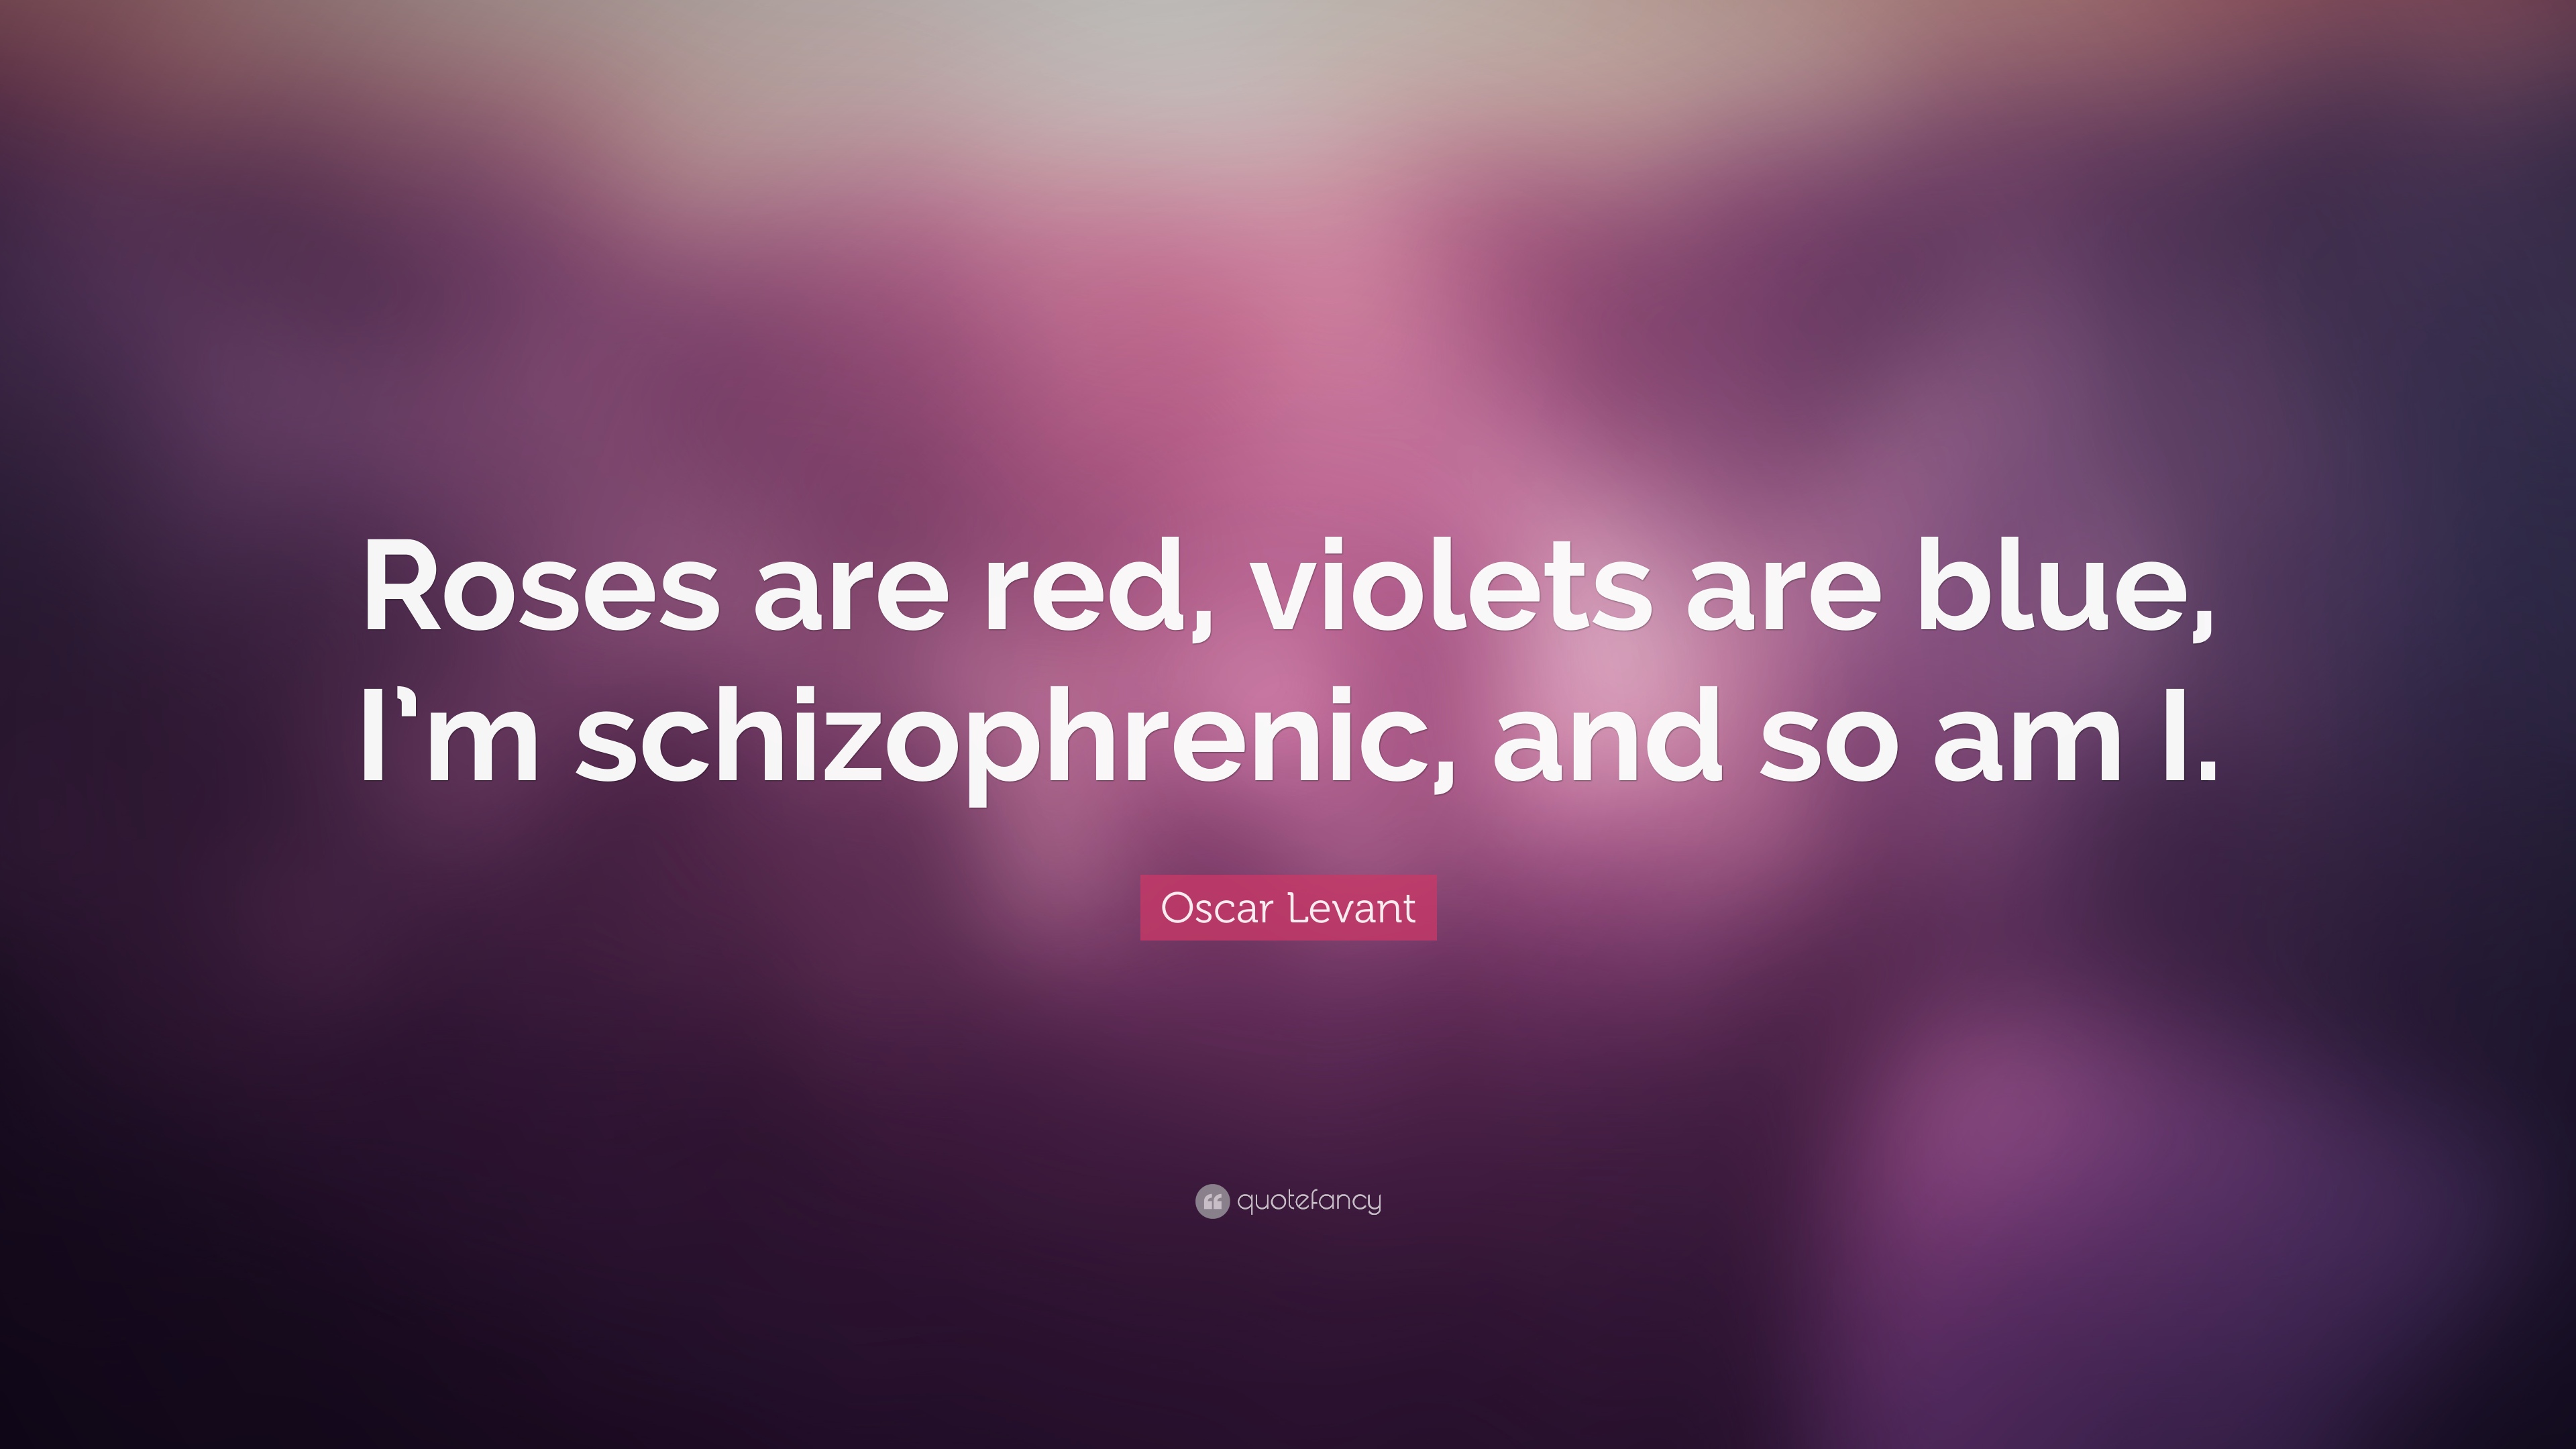 Oscar Levant Quote: “Roses are red, violets are blue, I'm schizophrenic, and so am I.”